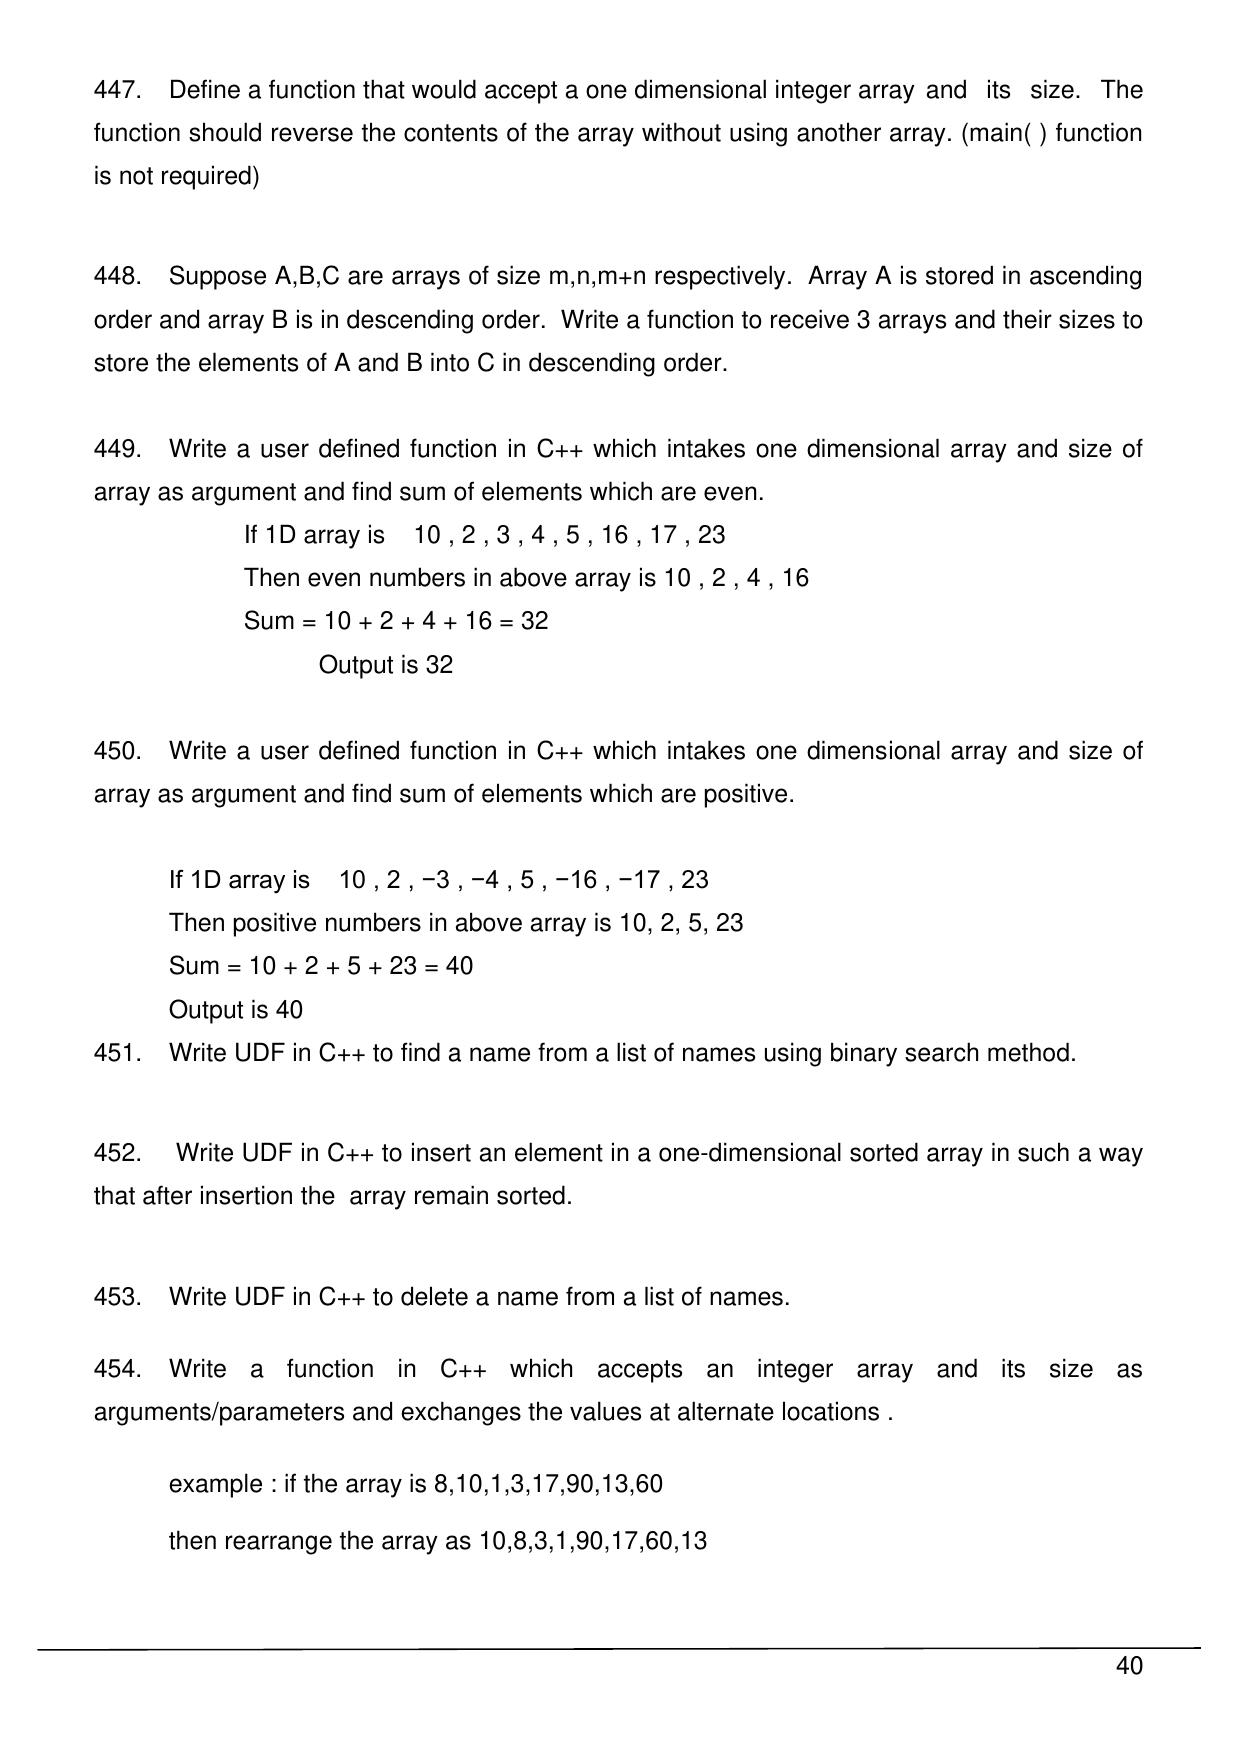 CBSE Worksheets for Class 11 Information Practices Question bank of all Chapters Assignment - Page 40